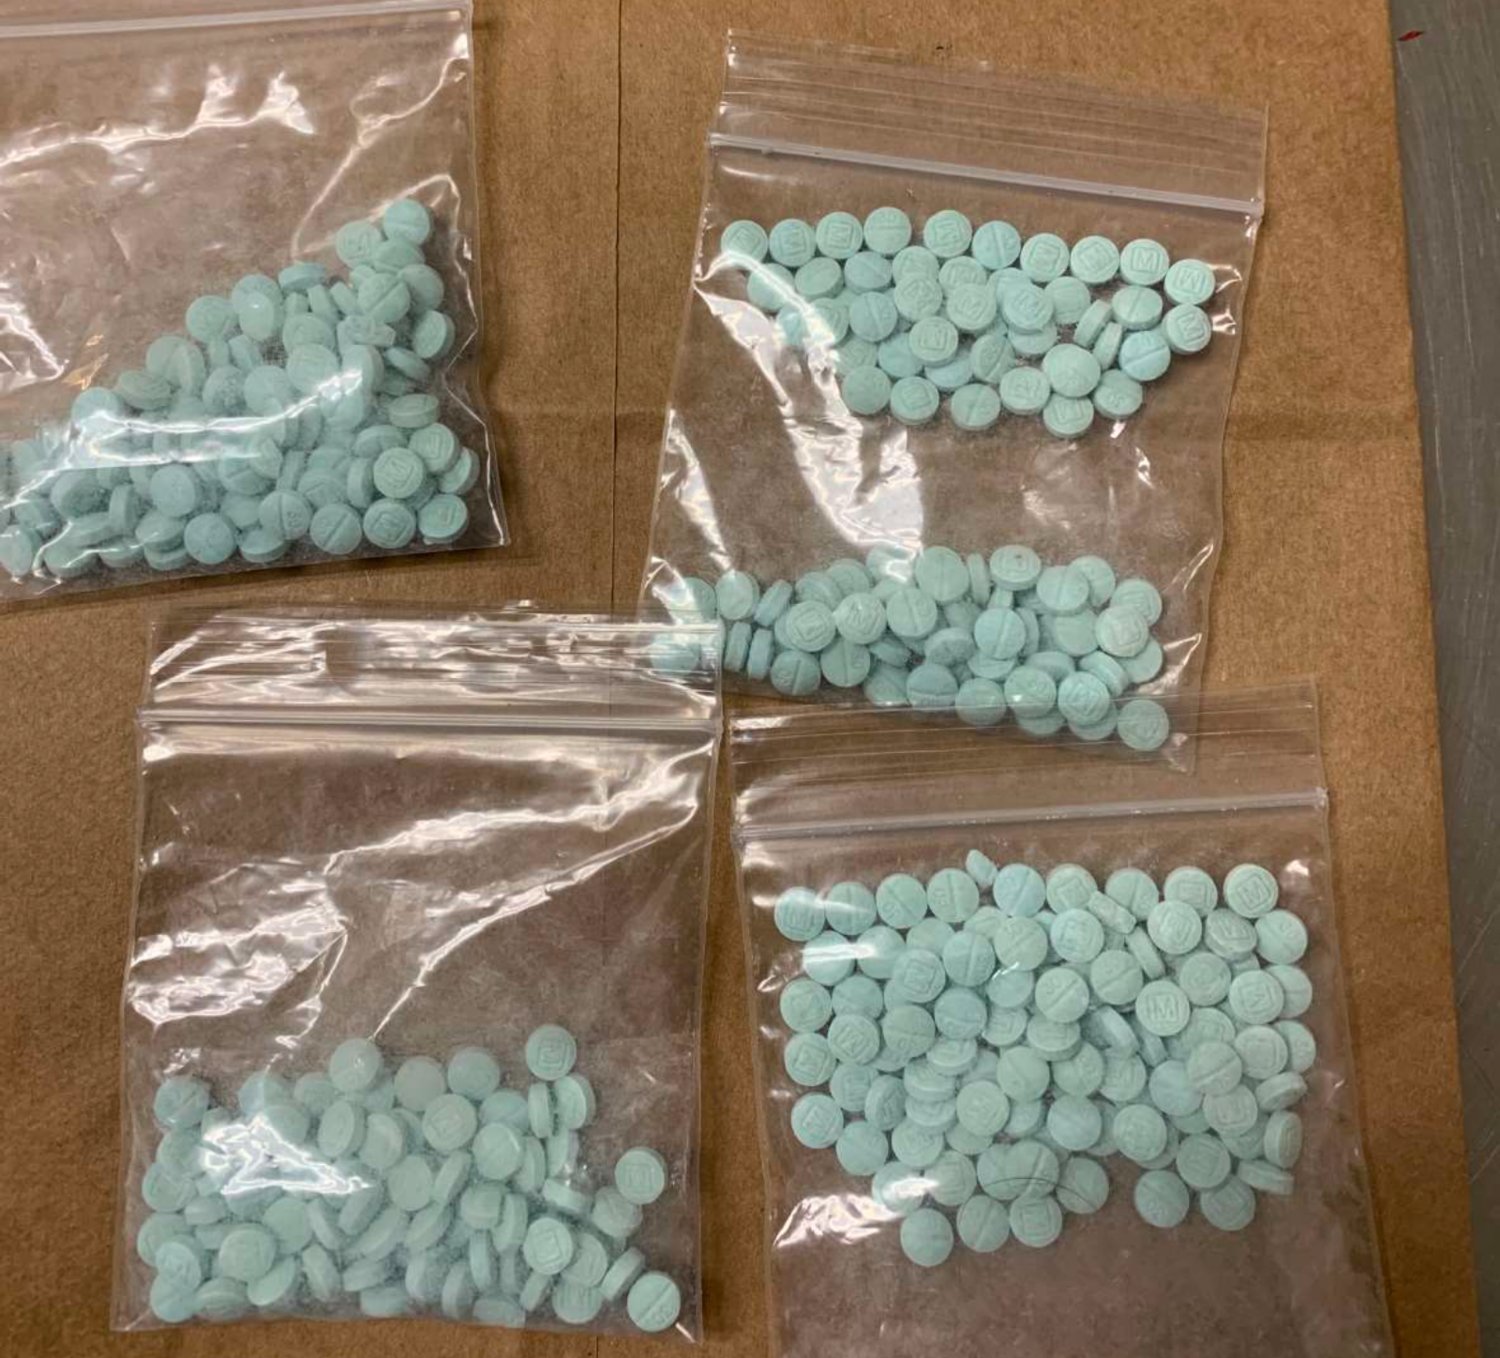 These are the pills found in the vehicle in the possession of Sasha Marie Beell on Jan. 18, 2021, according to Olympia police.